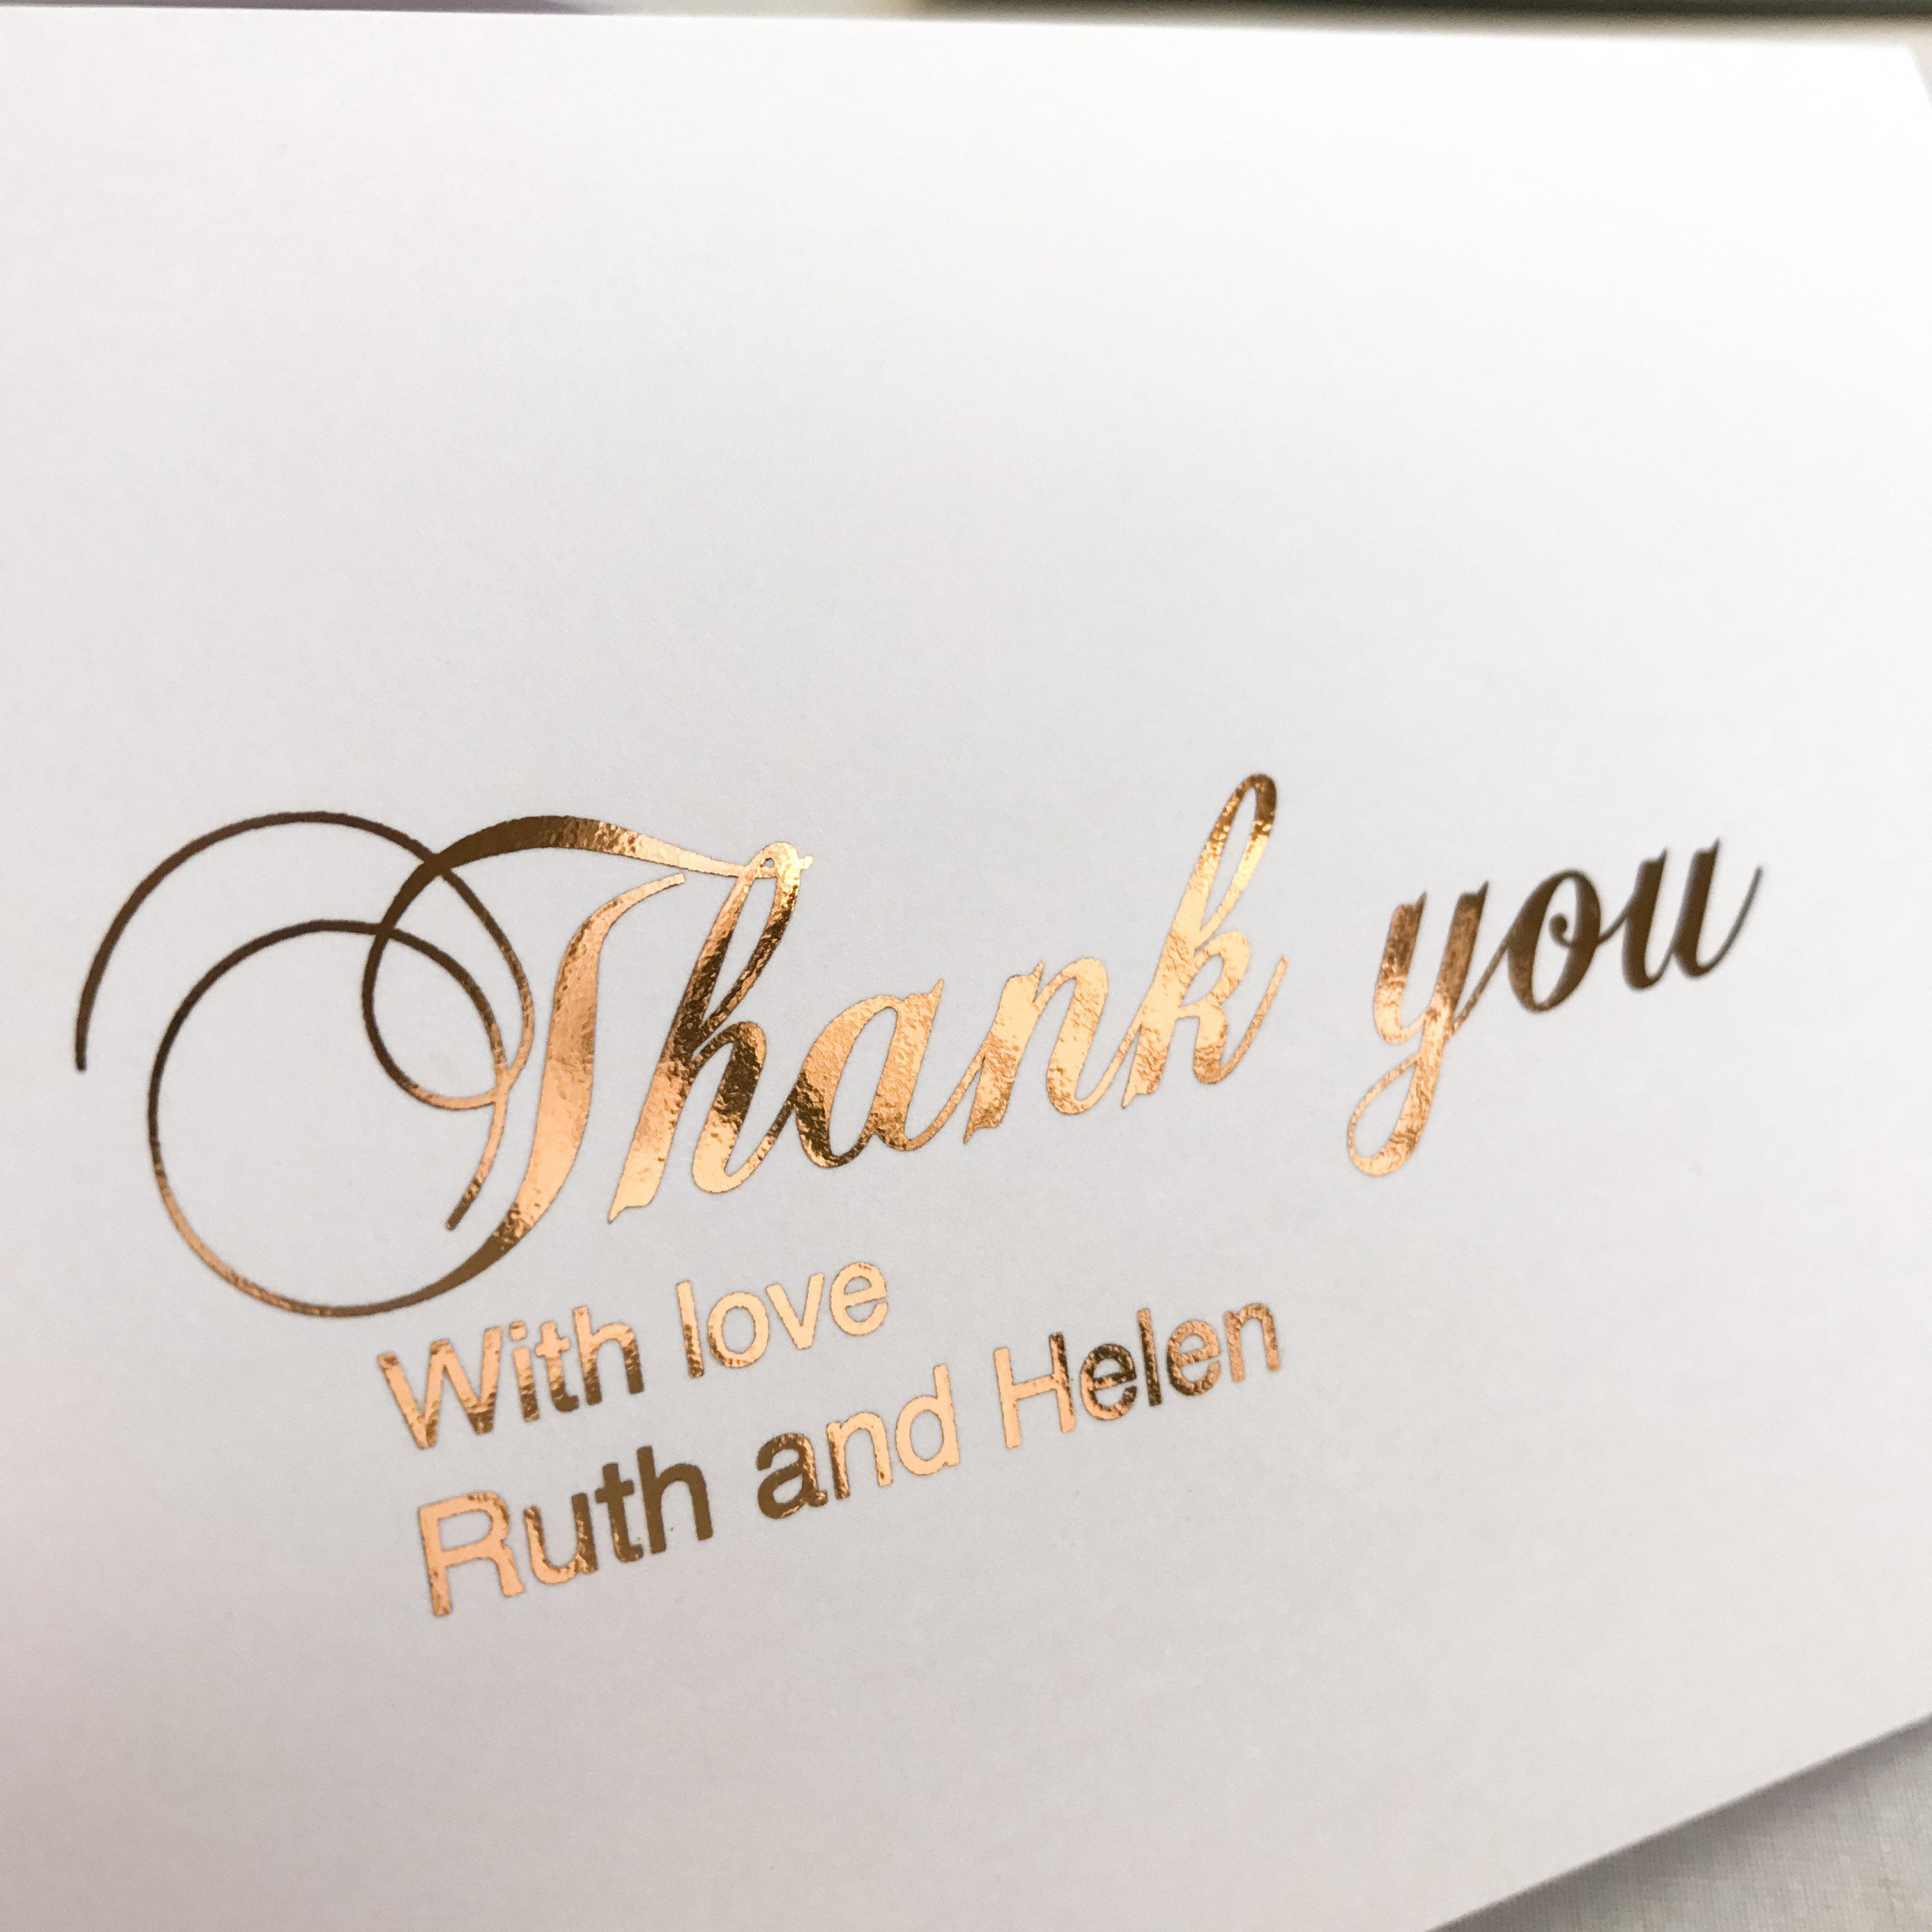 Rose Gold Glitter & Foil 18th Birthday Thank You Gift Tags